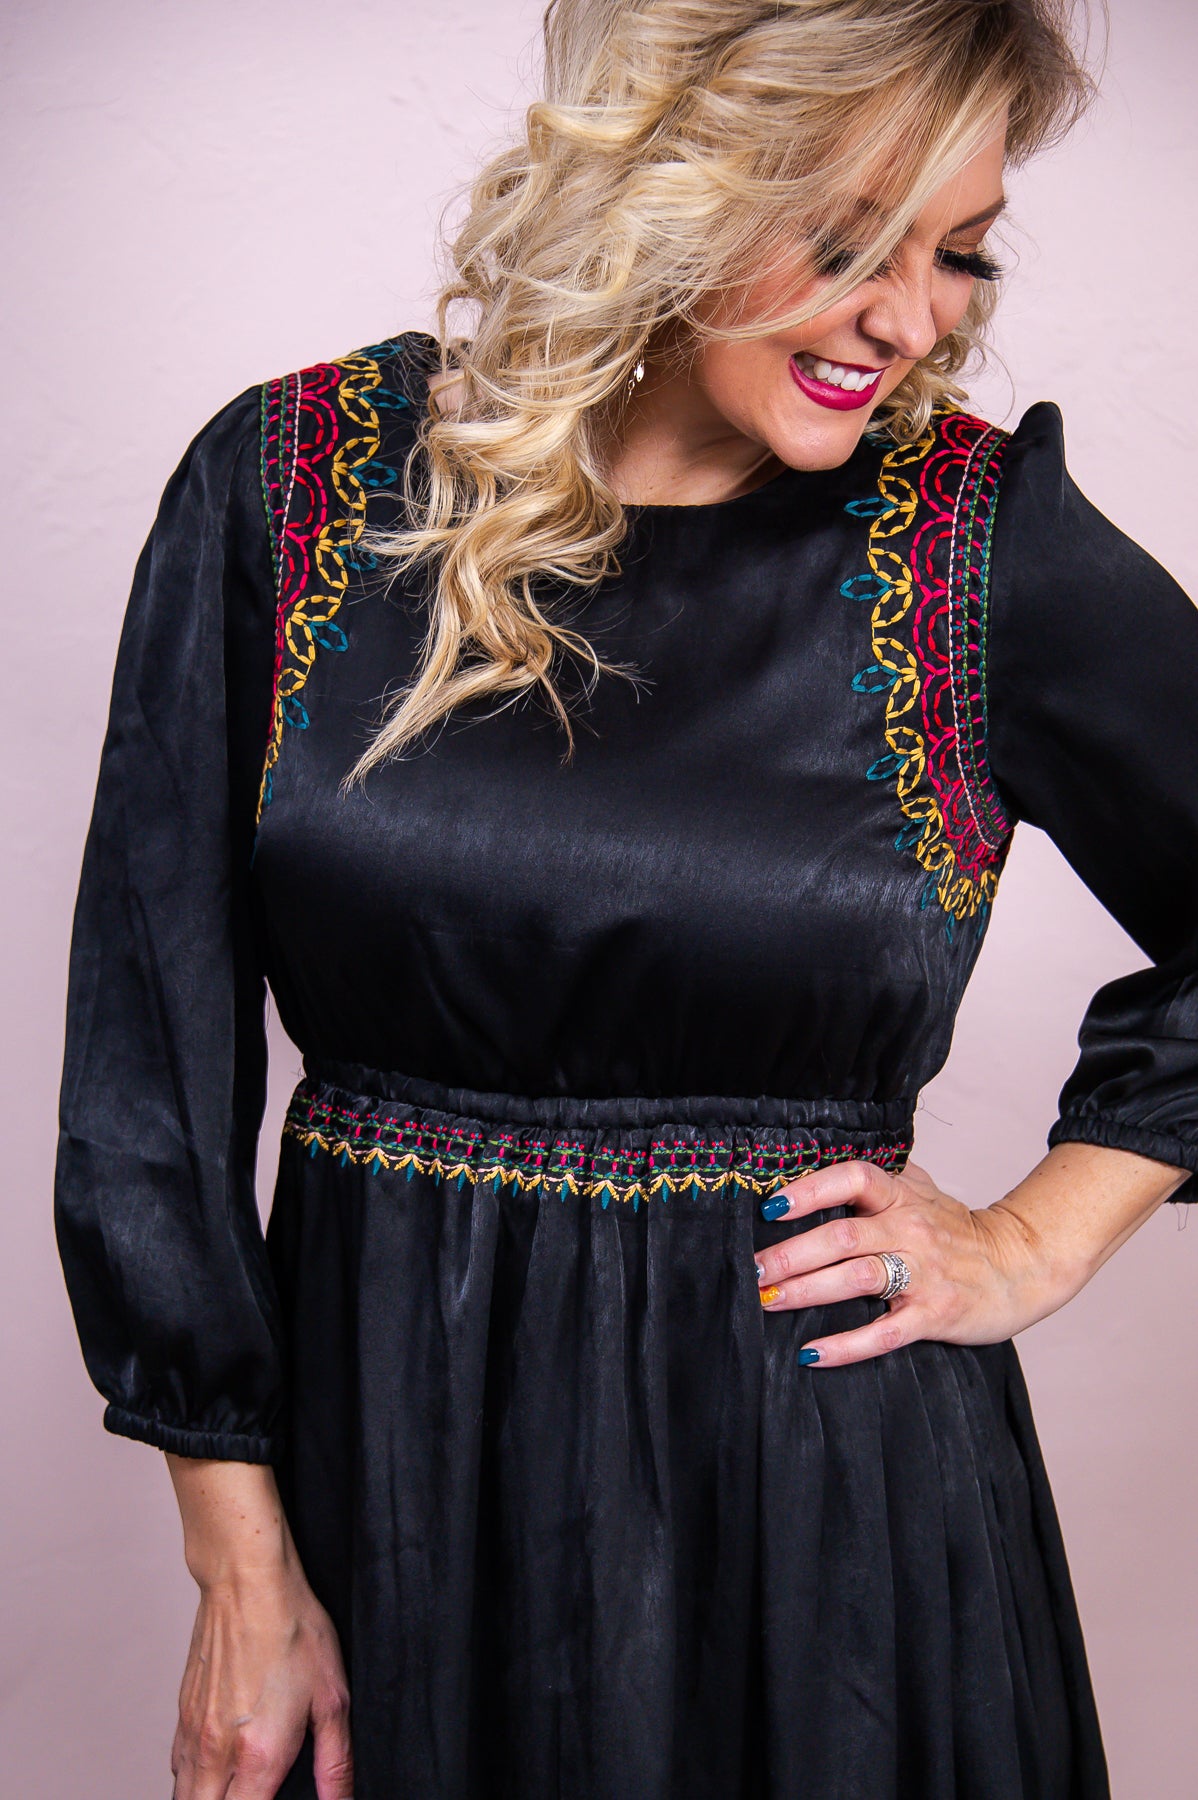 Wintry Winds Black/Multi Color Embroidered Dress - D5043BK